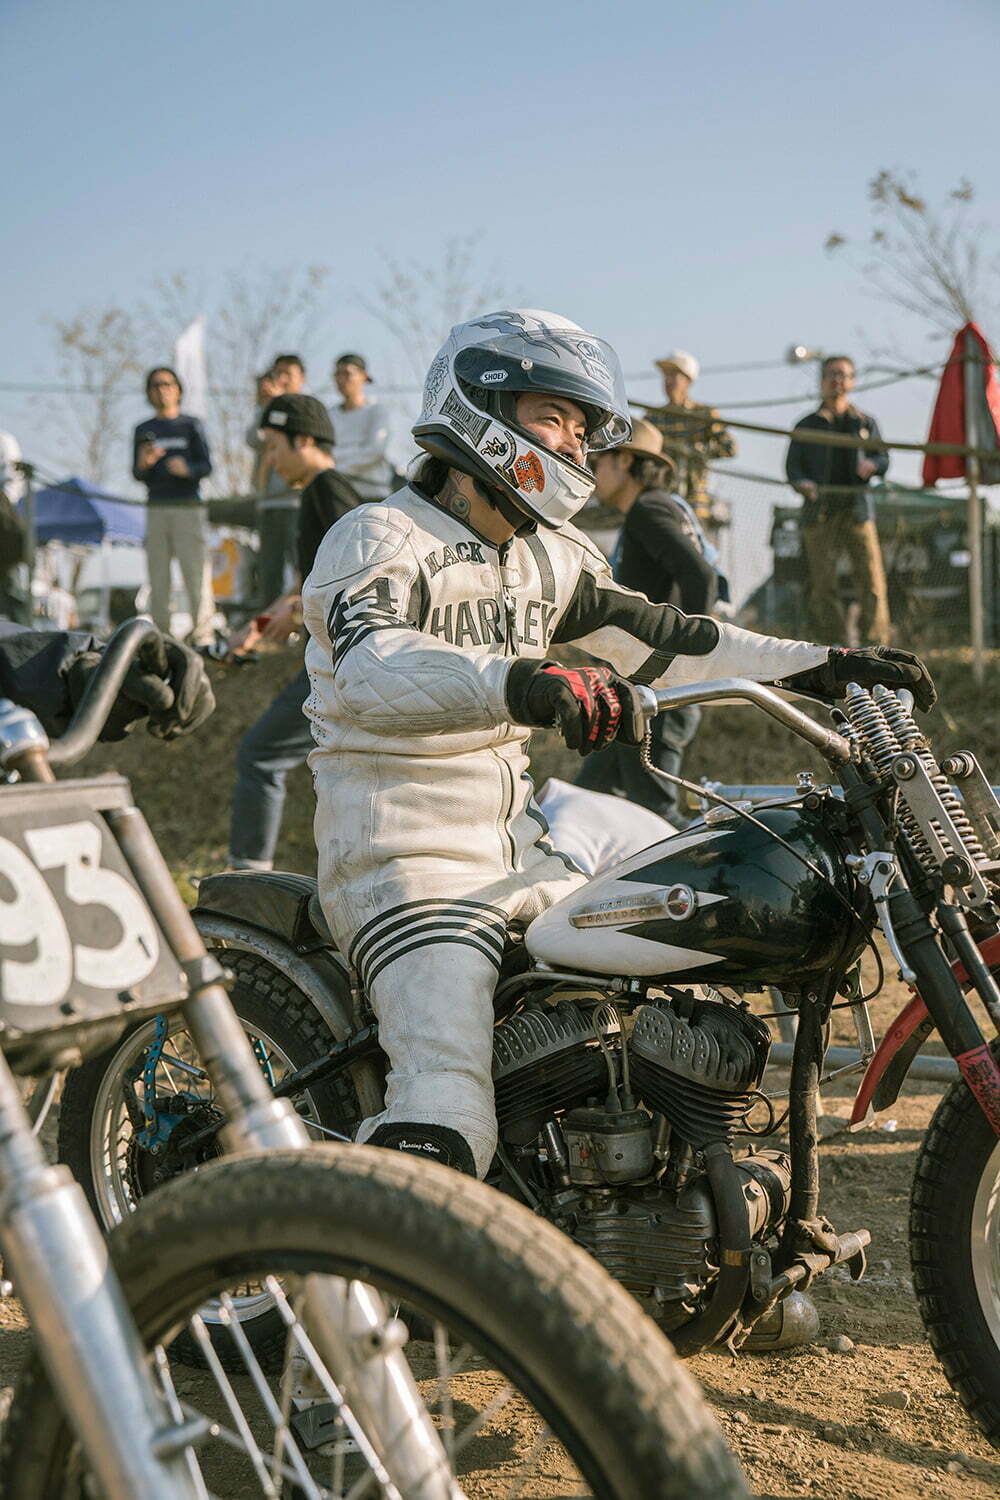 Mack on motorcycle at starting line